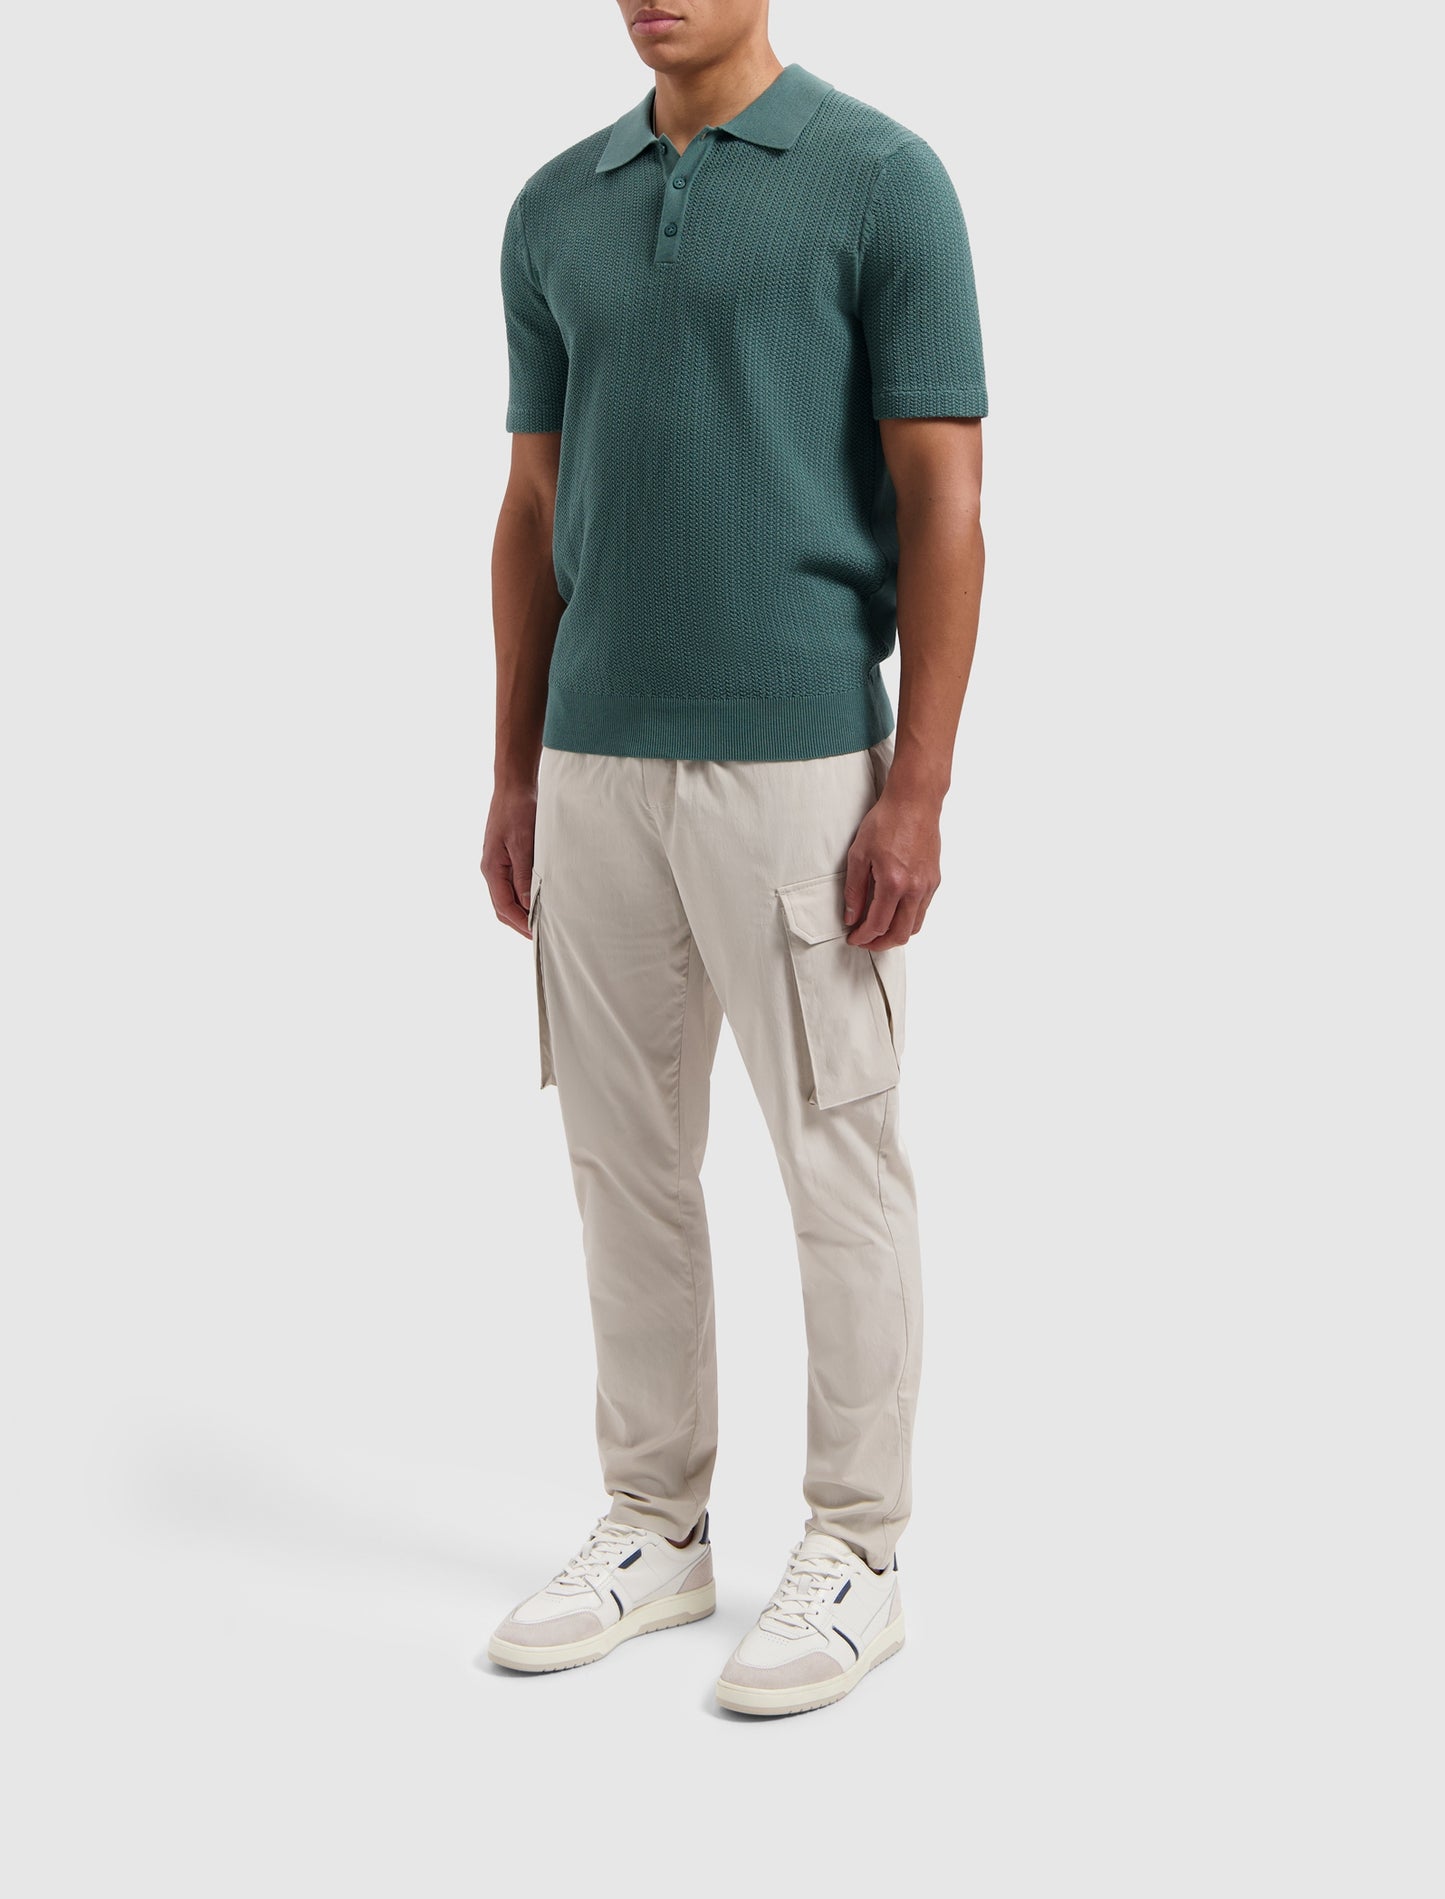 PURE PATH | Structure Knitwear Polo - Faded Green